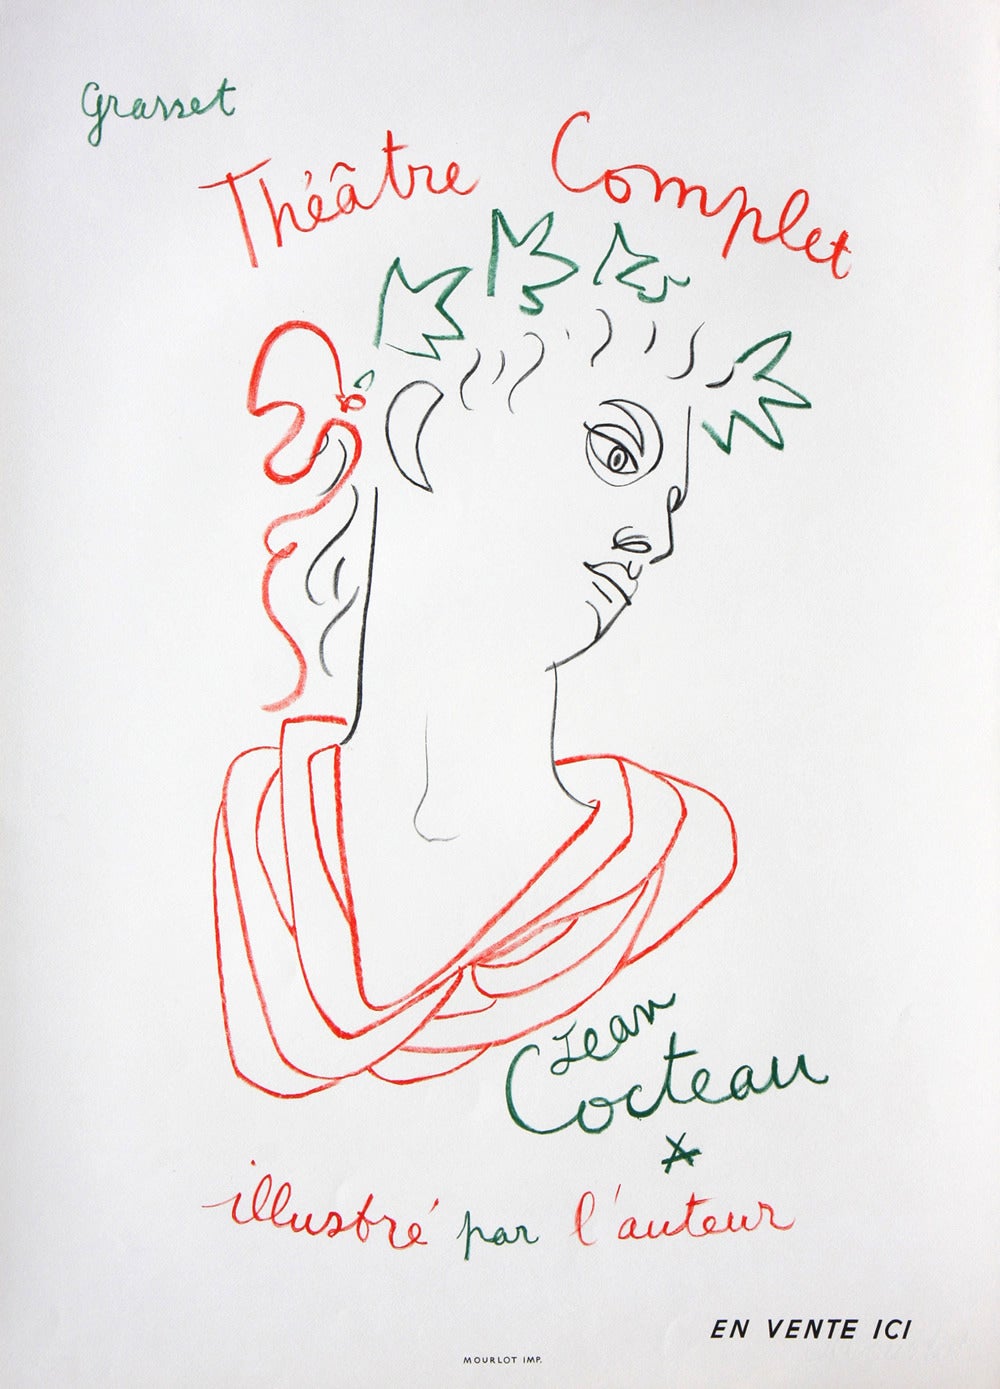 Jean Cocteau Abstract Print - Grasset Theatre Complet